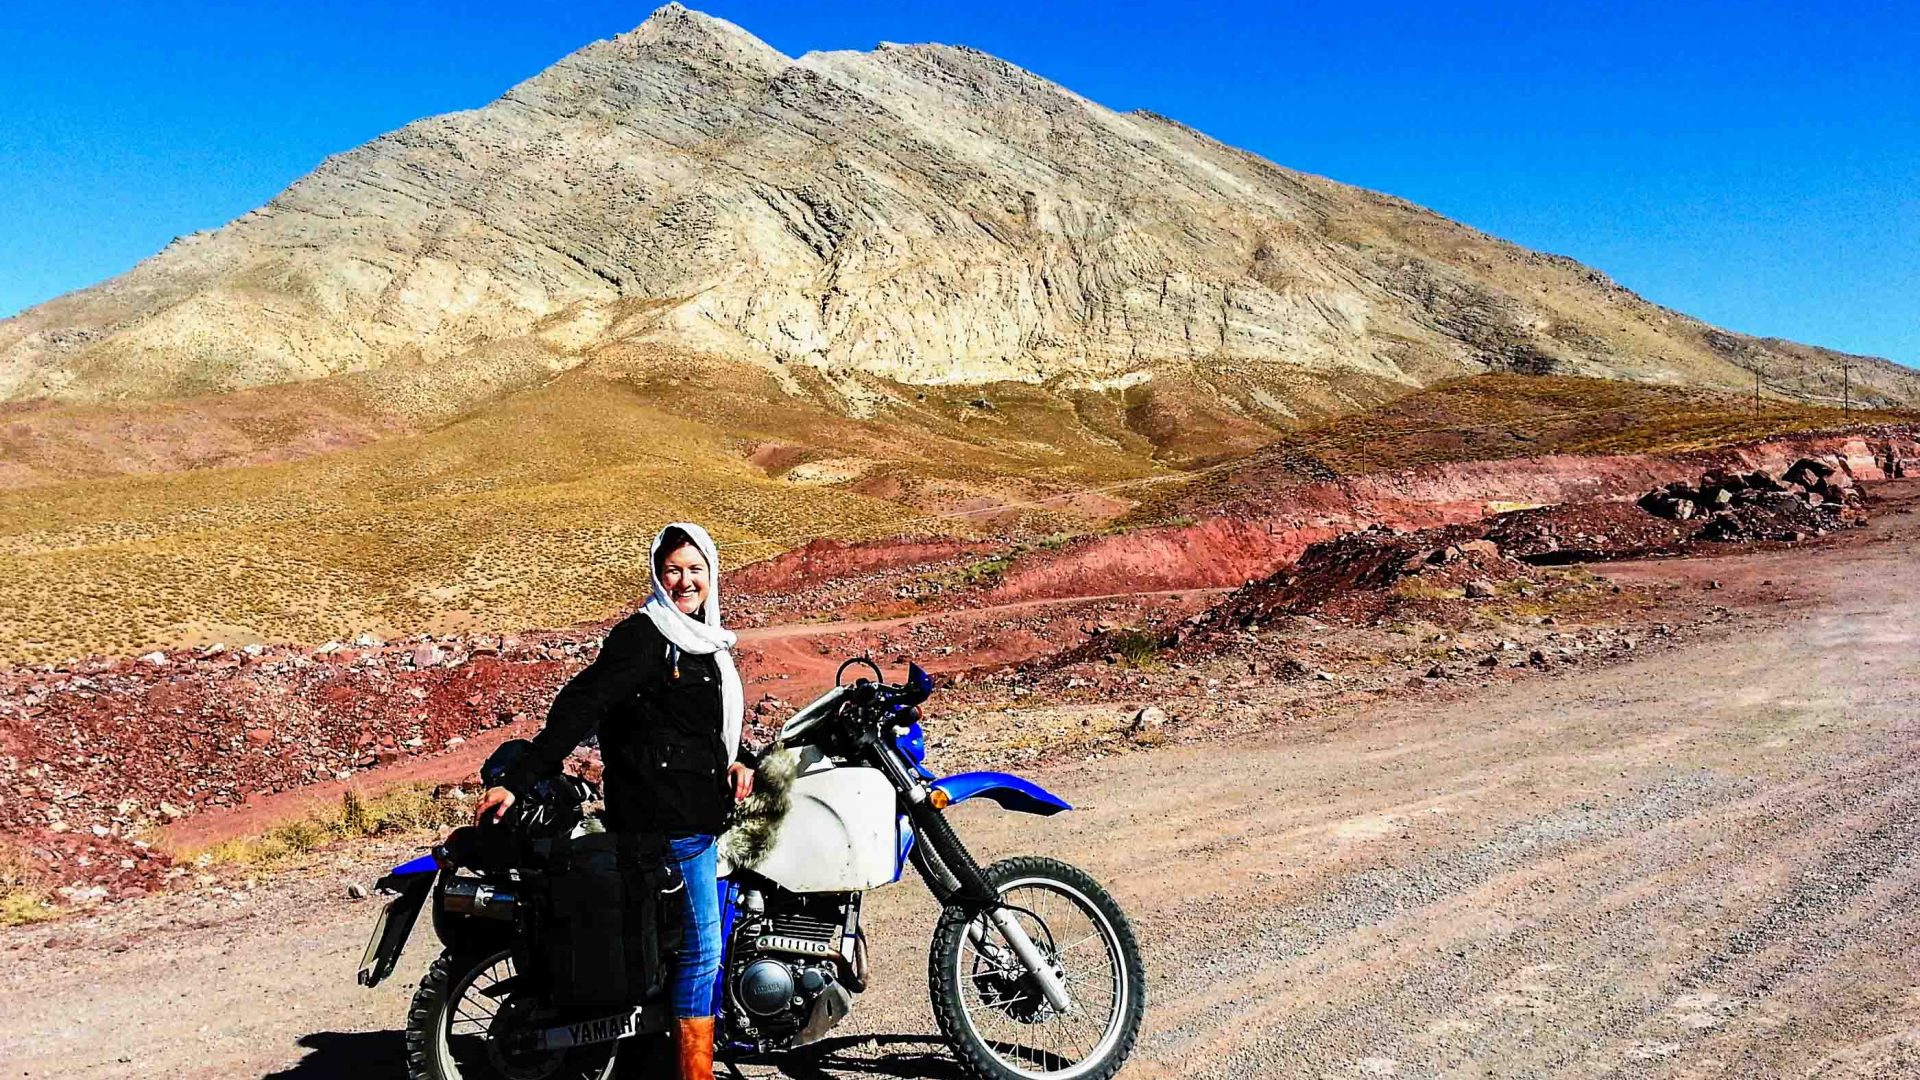 Lois by her bike in the desert mountains of Iran.